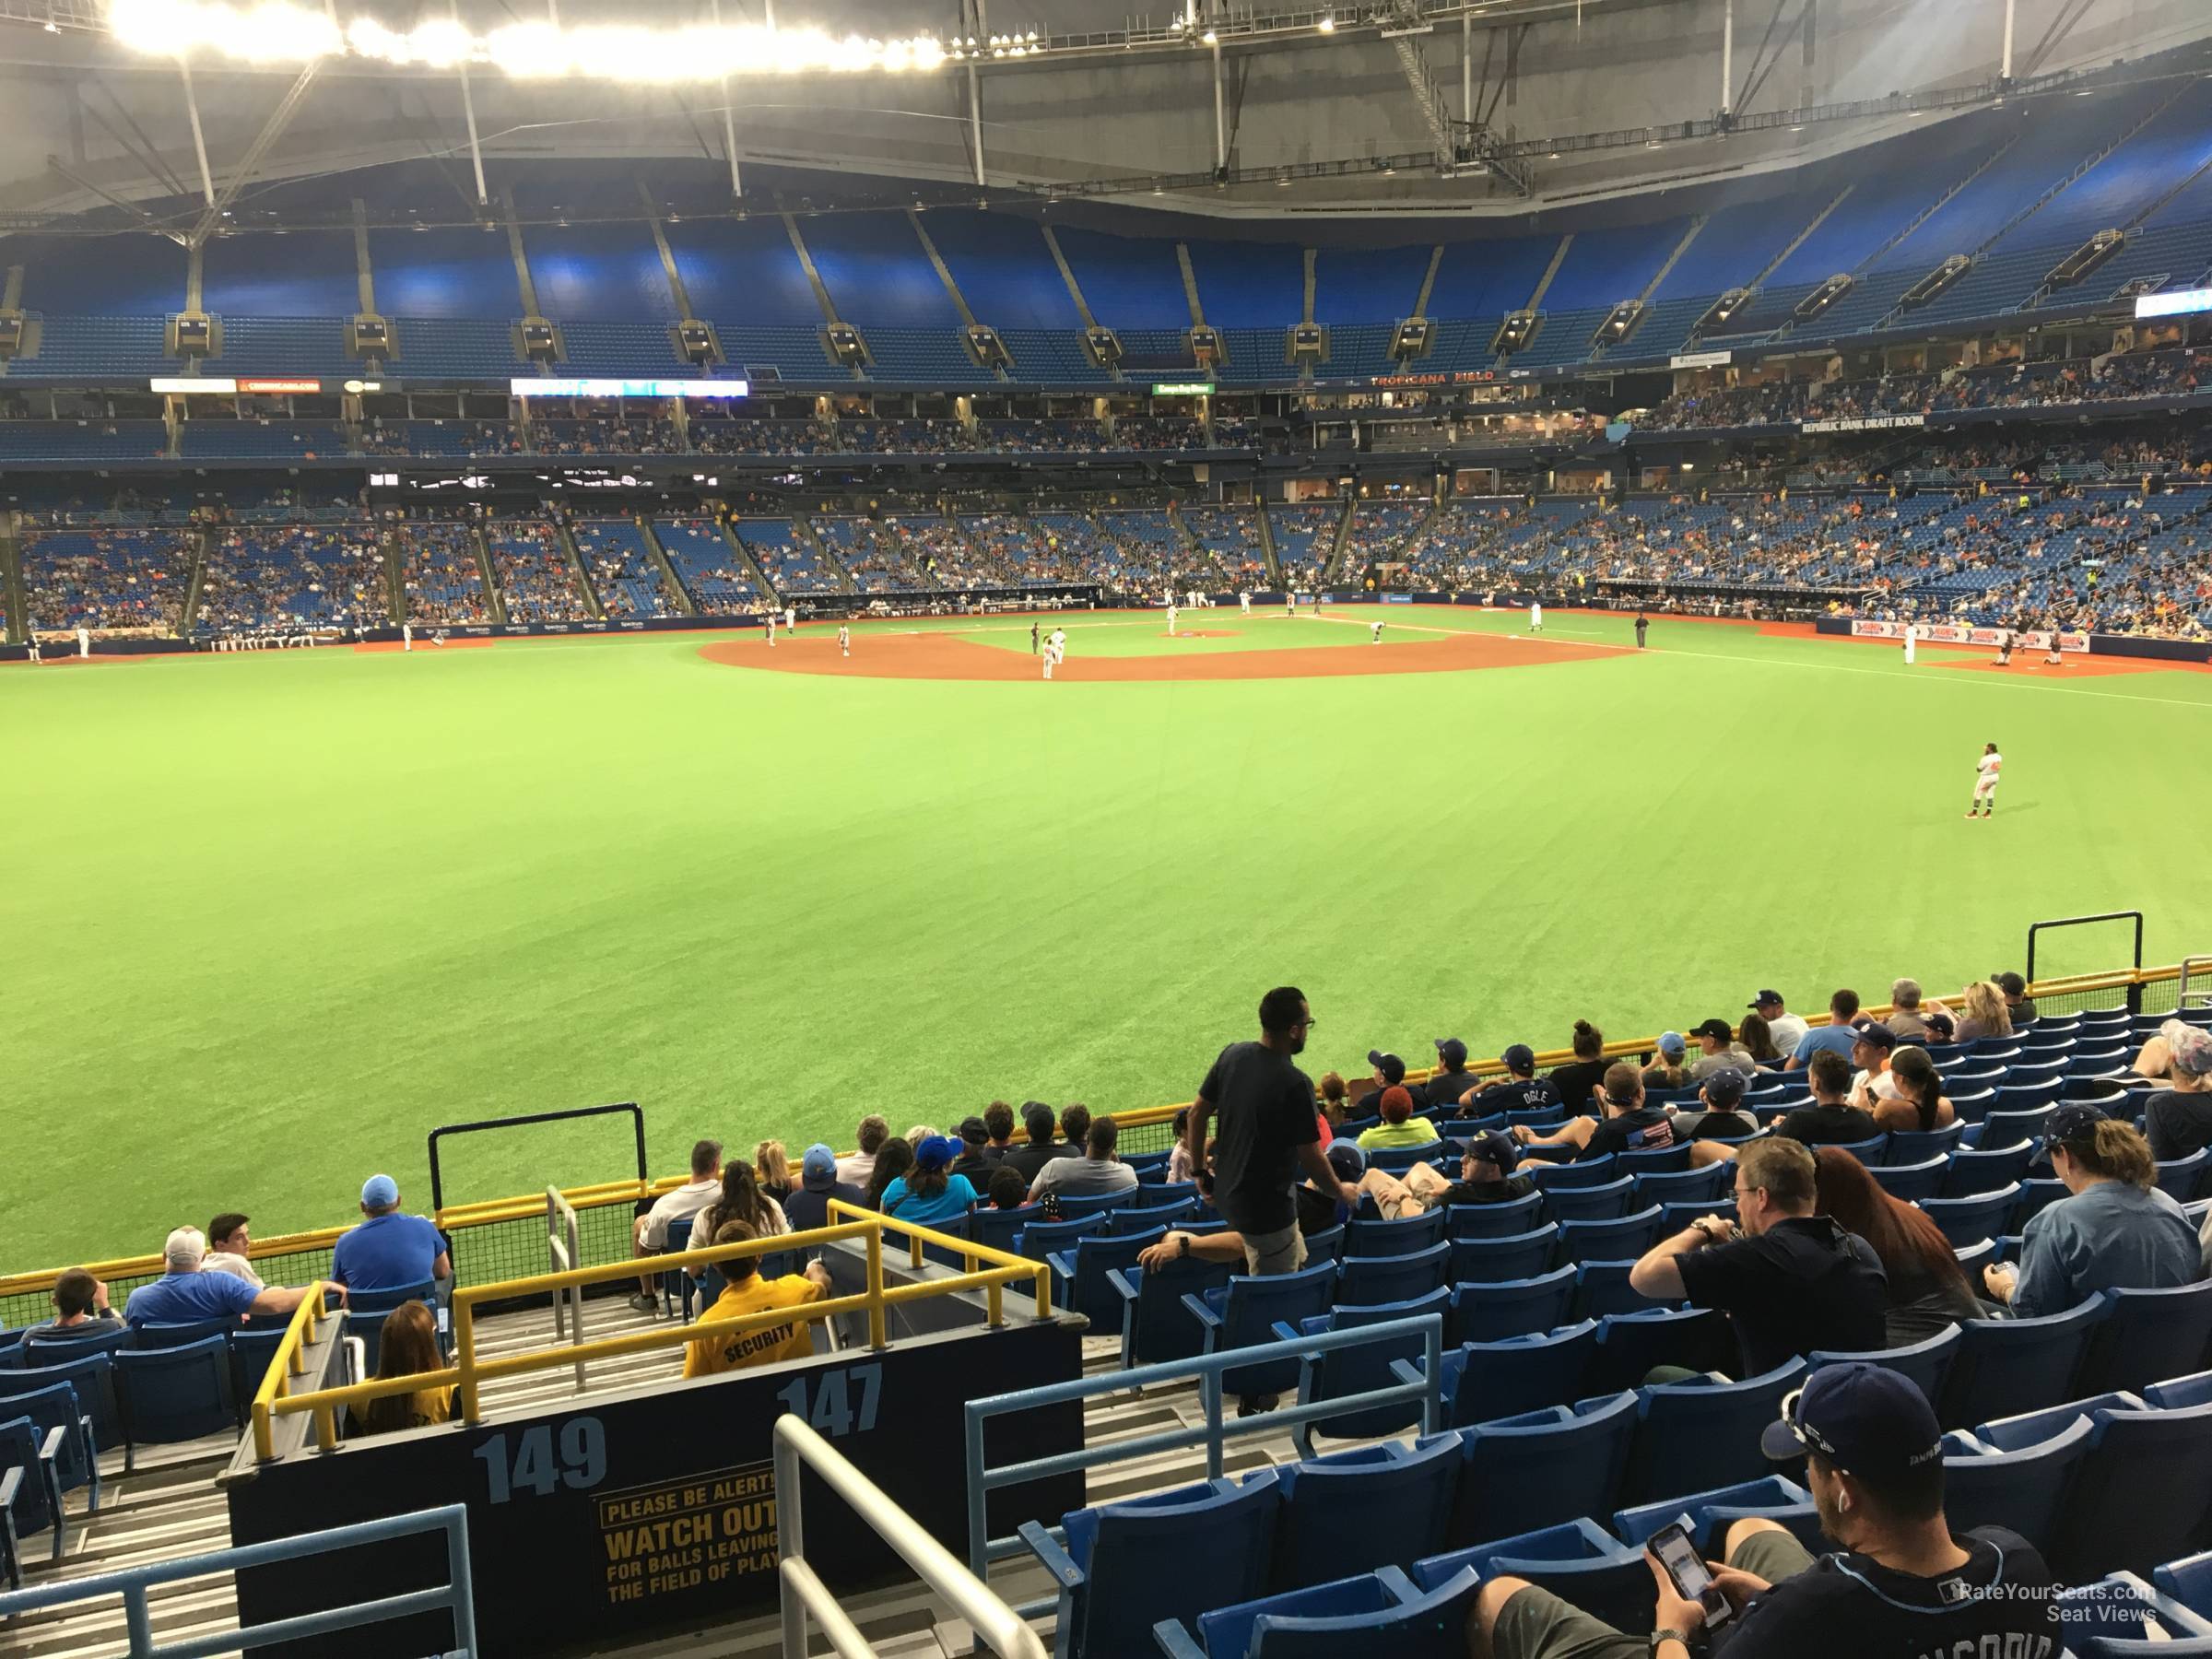 section 149, row rr seat view  for baseball - tropicana field